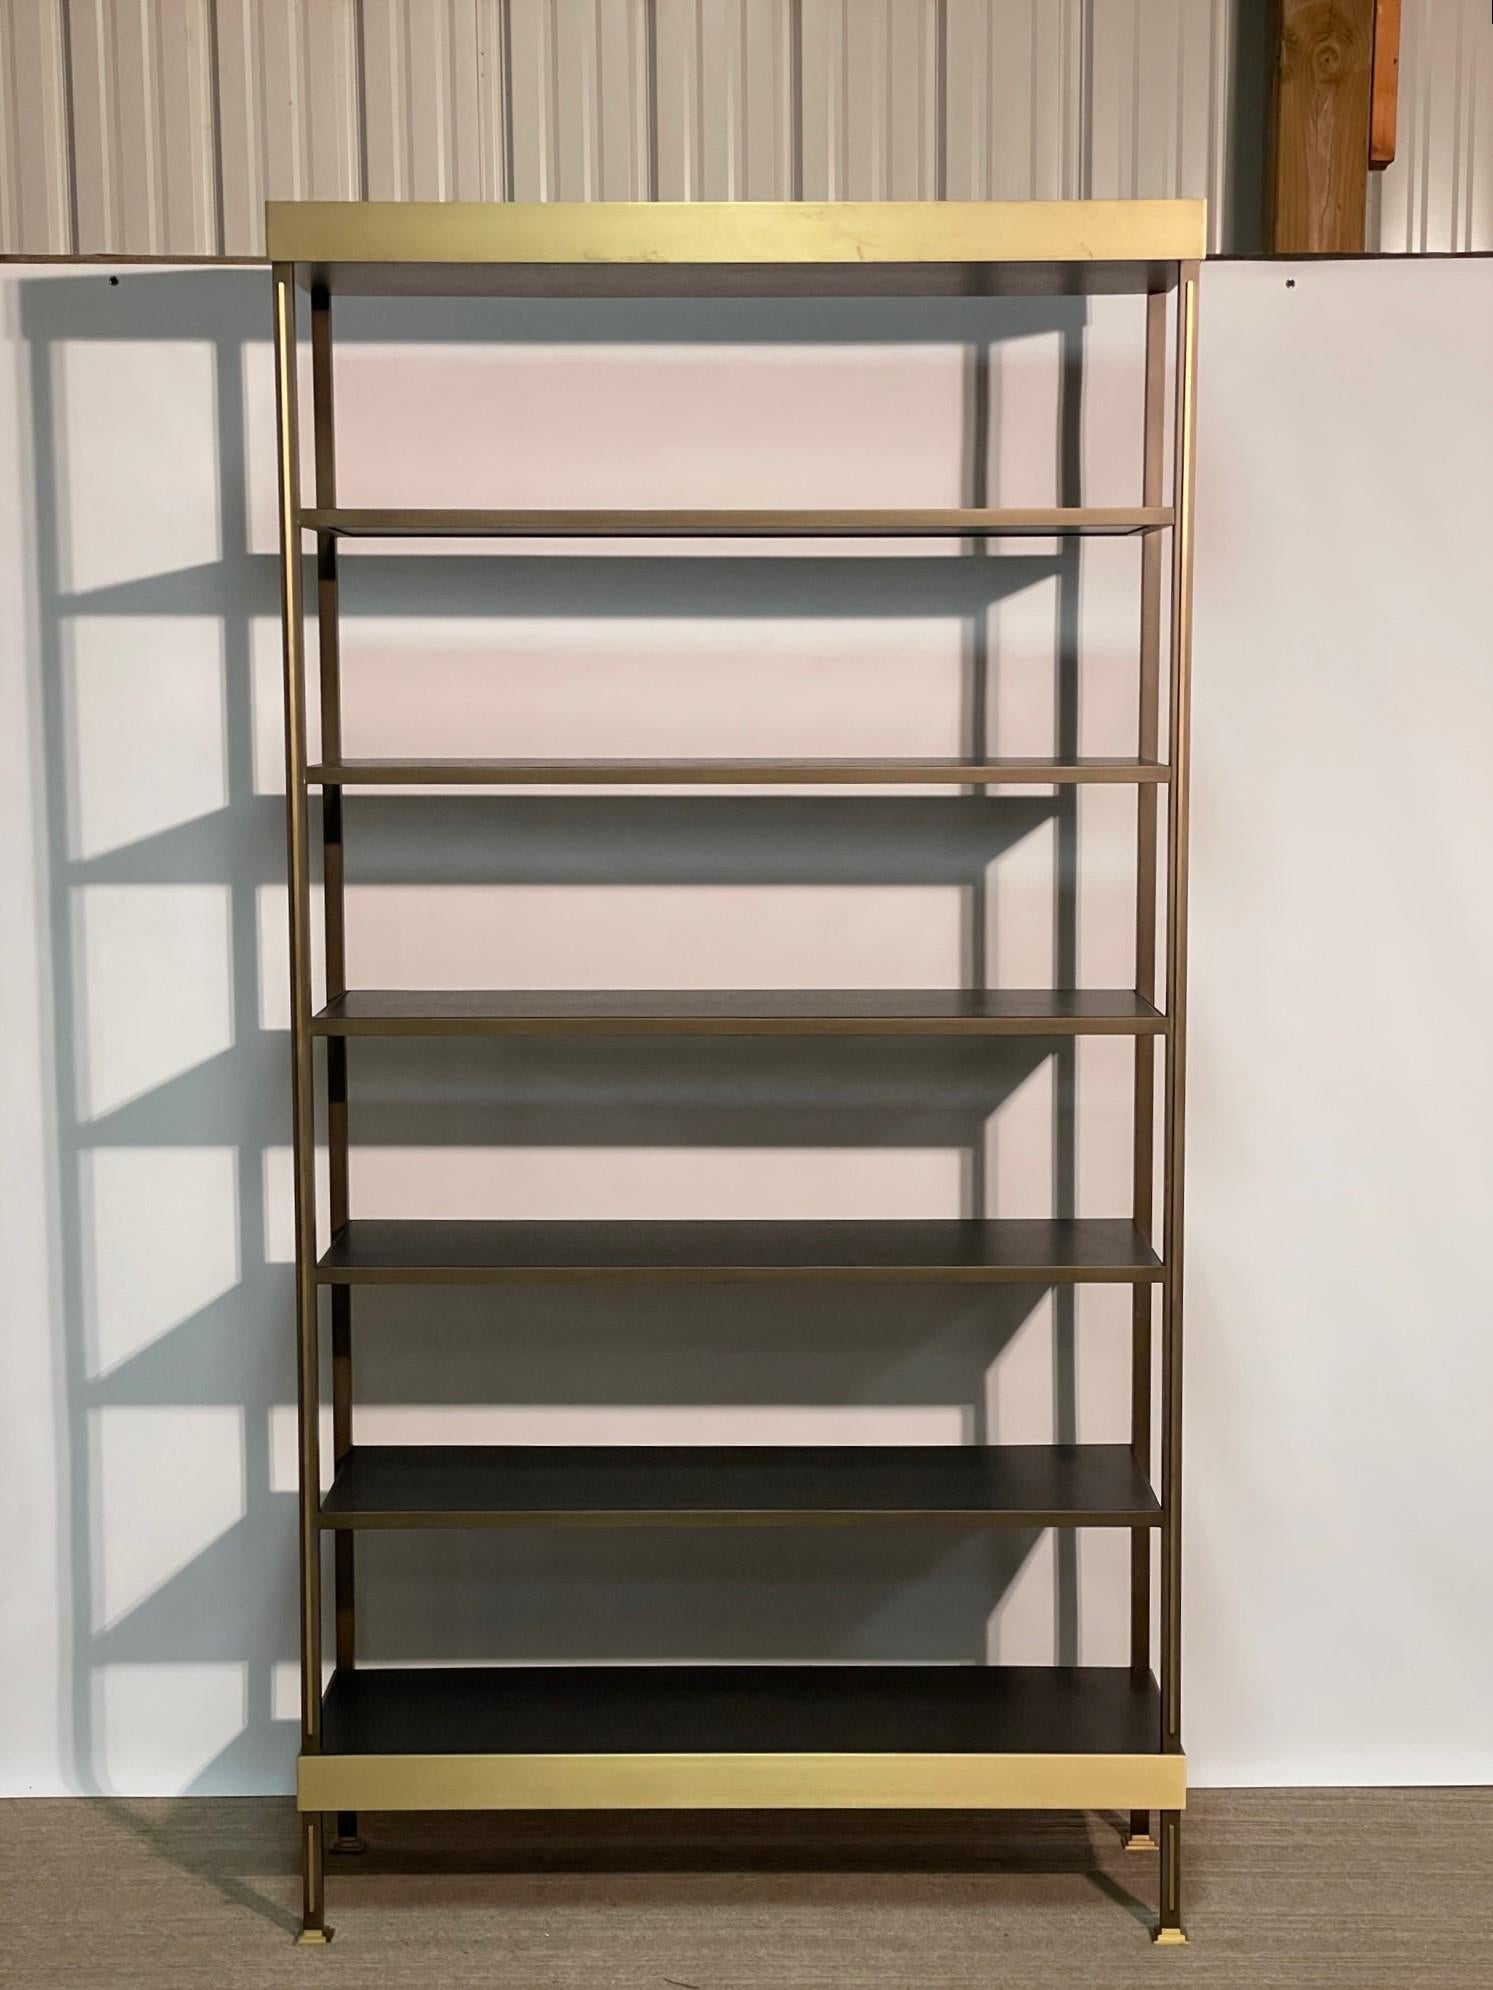 Substantial and Impressive are words that come to mind when viewing the Prate bookshelf by Jean de Merry.  The Metal frame finishing in Old Silver with the Bronze accents finished in Light Bronze convey body weight and strength to this formidable